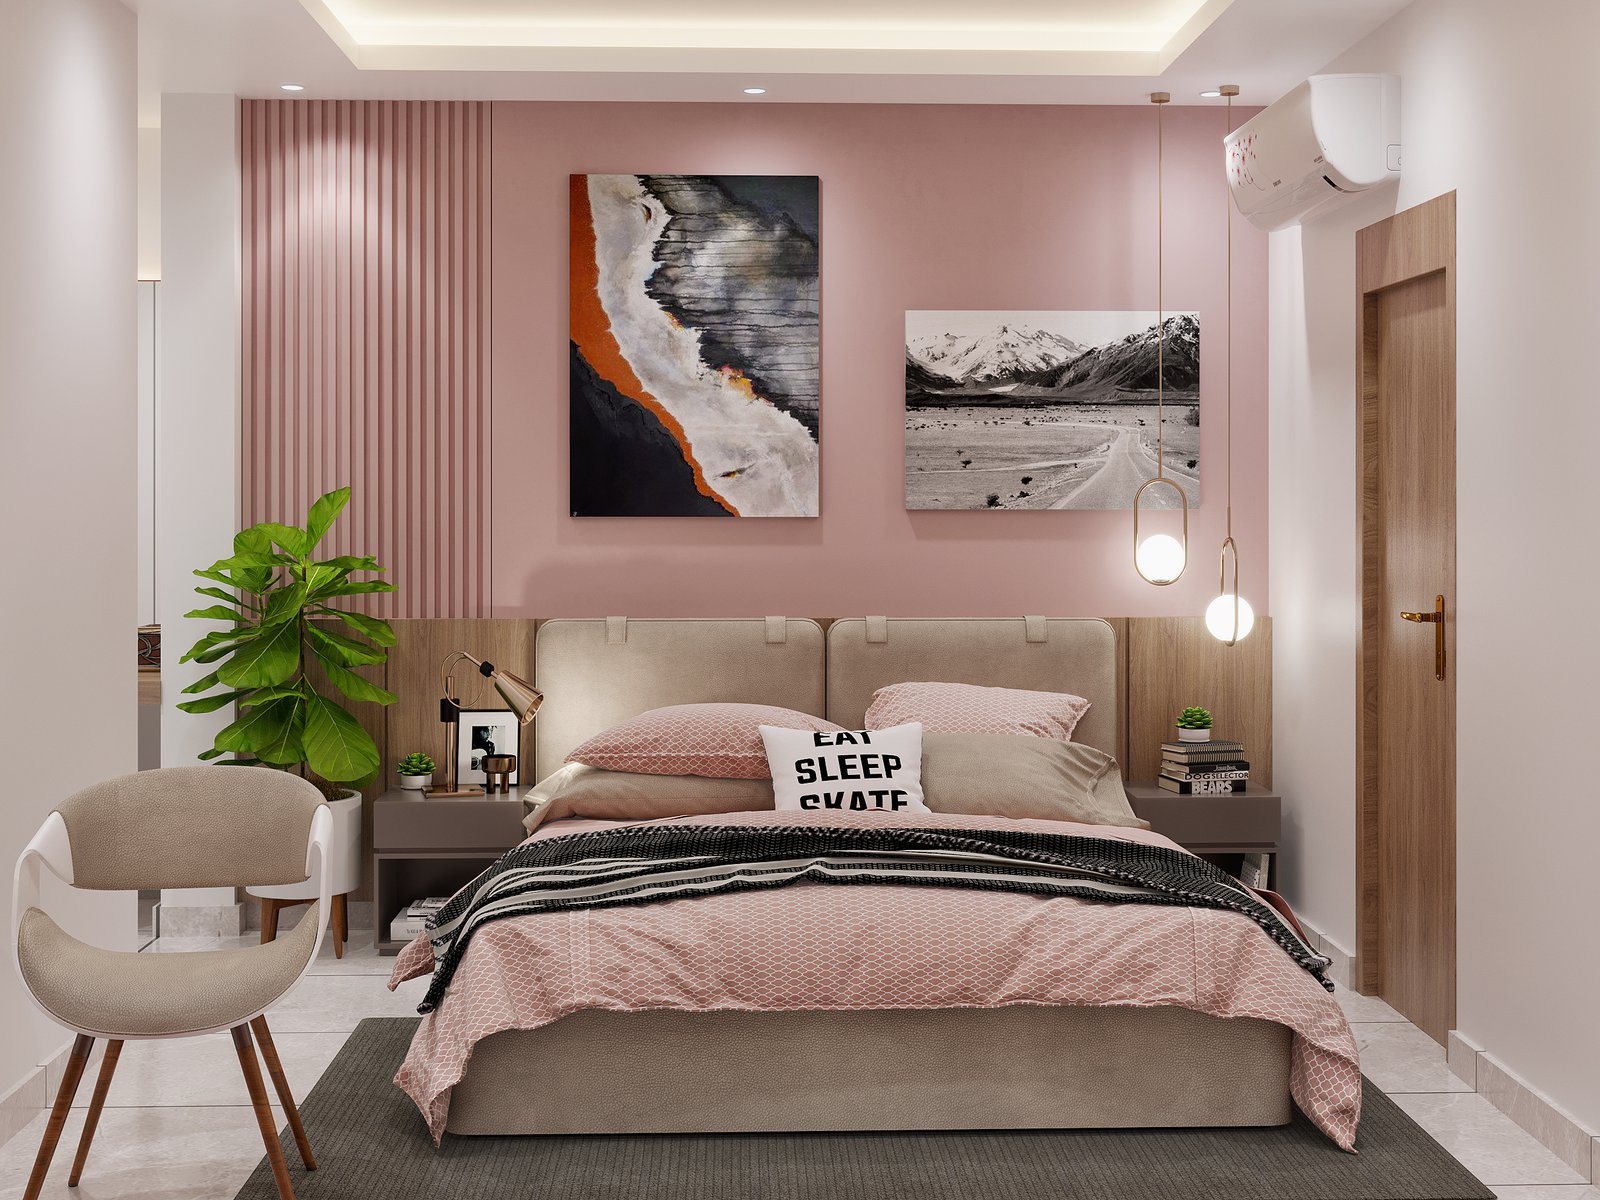 <span  class="uc_style_uc_tiles_grid_image_elementor_uc_items_attribute_title" style="color:#ffffff;">BEDROOM8</span>